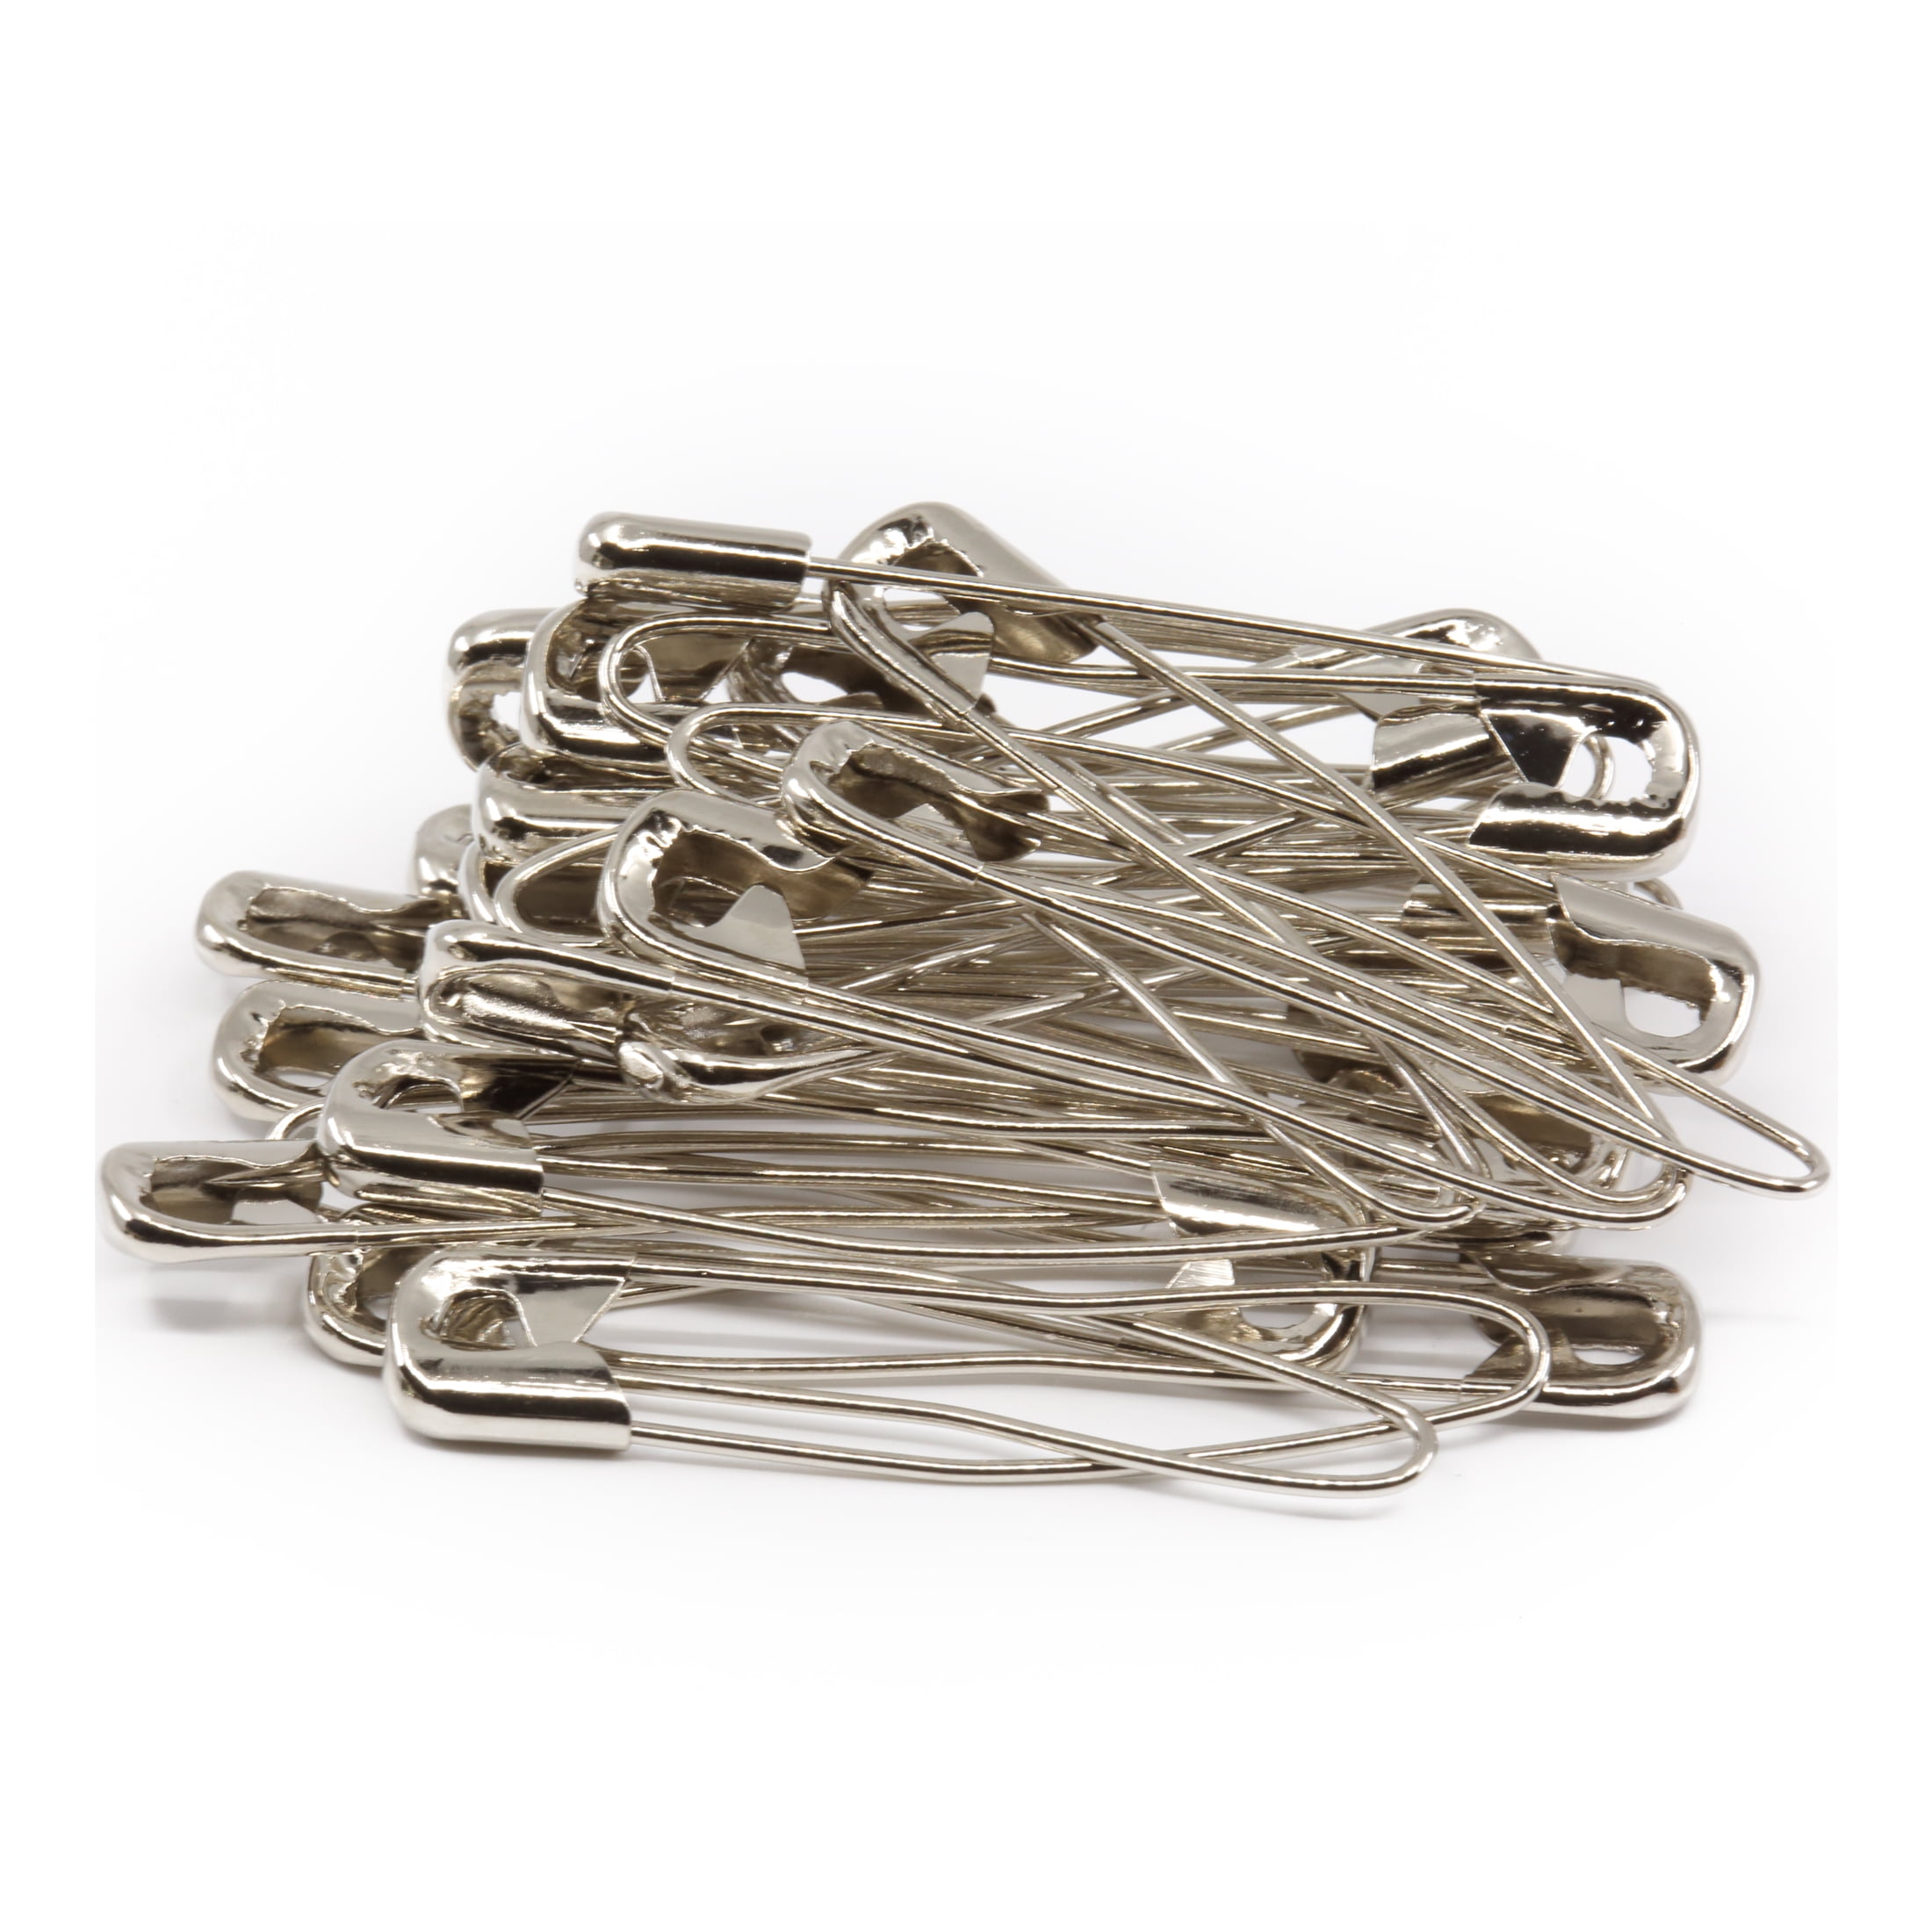  XKDOUS Safety Pins, 400 PCS Safety Pins Assorted, 5